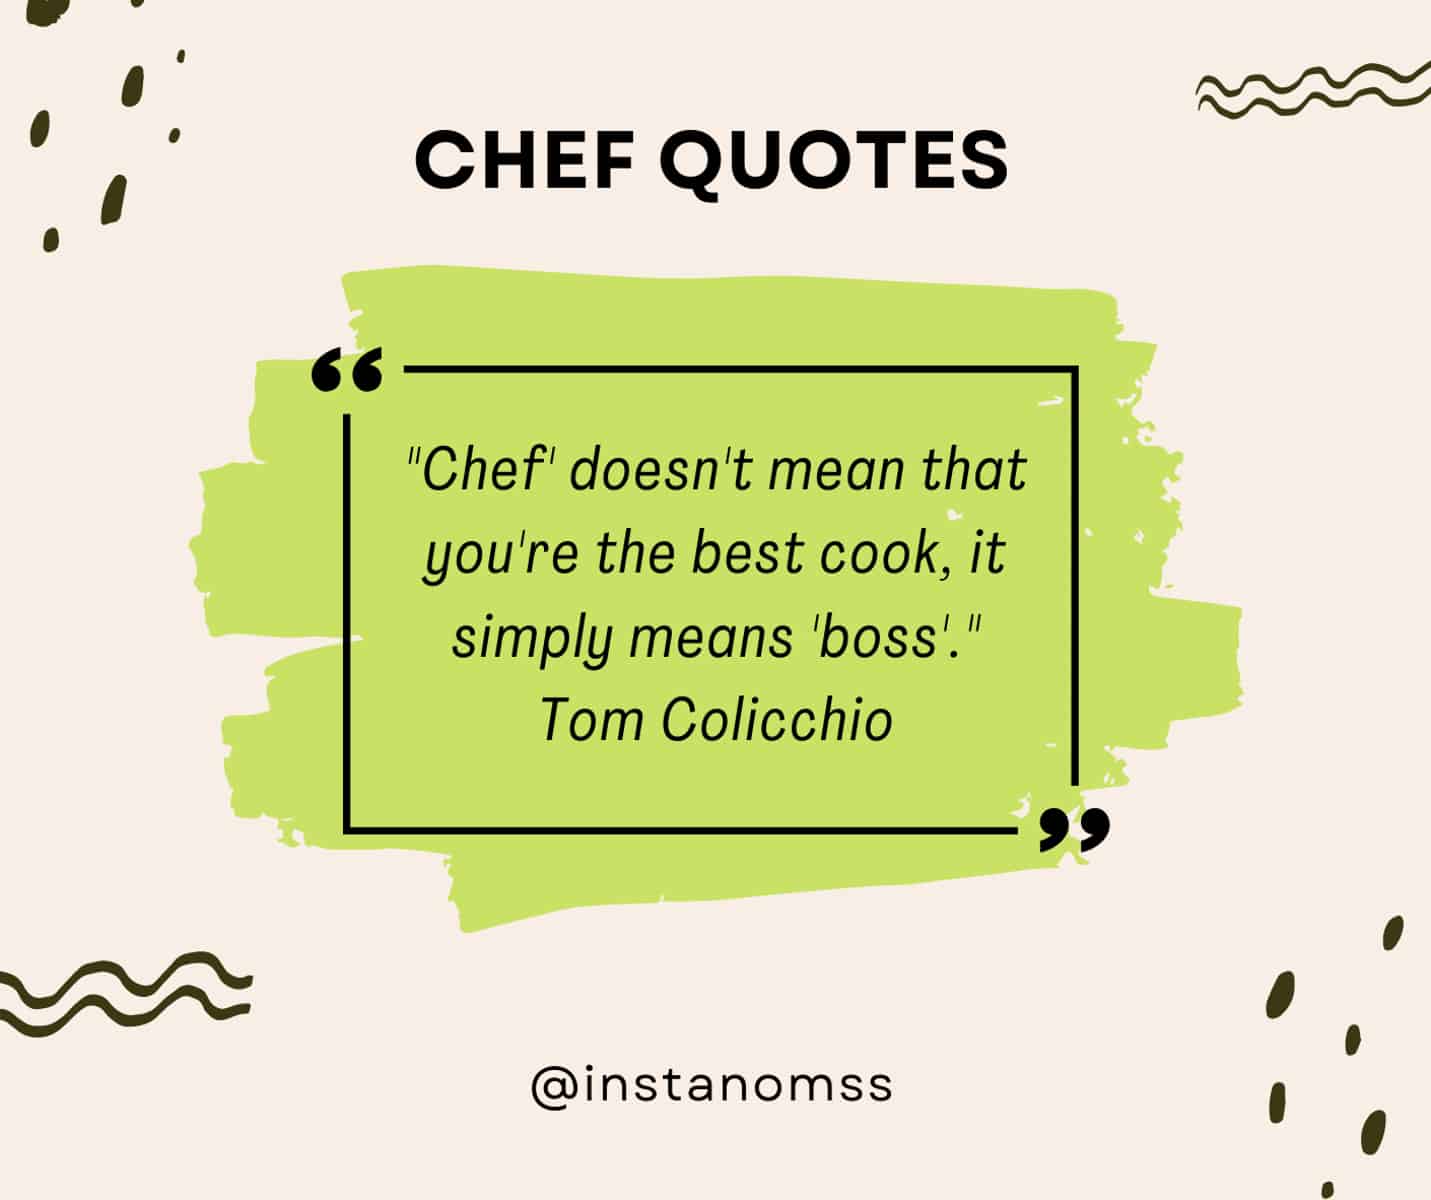 "Chef' doesn't mean that you're the best cook, it simply means 'boss'." Tom Colicchio